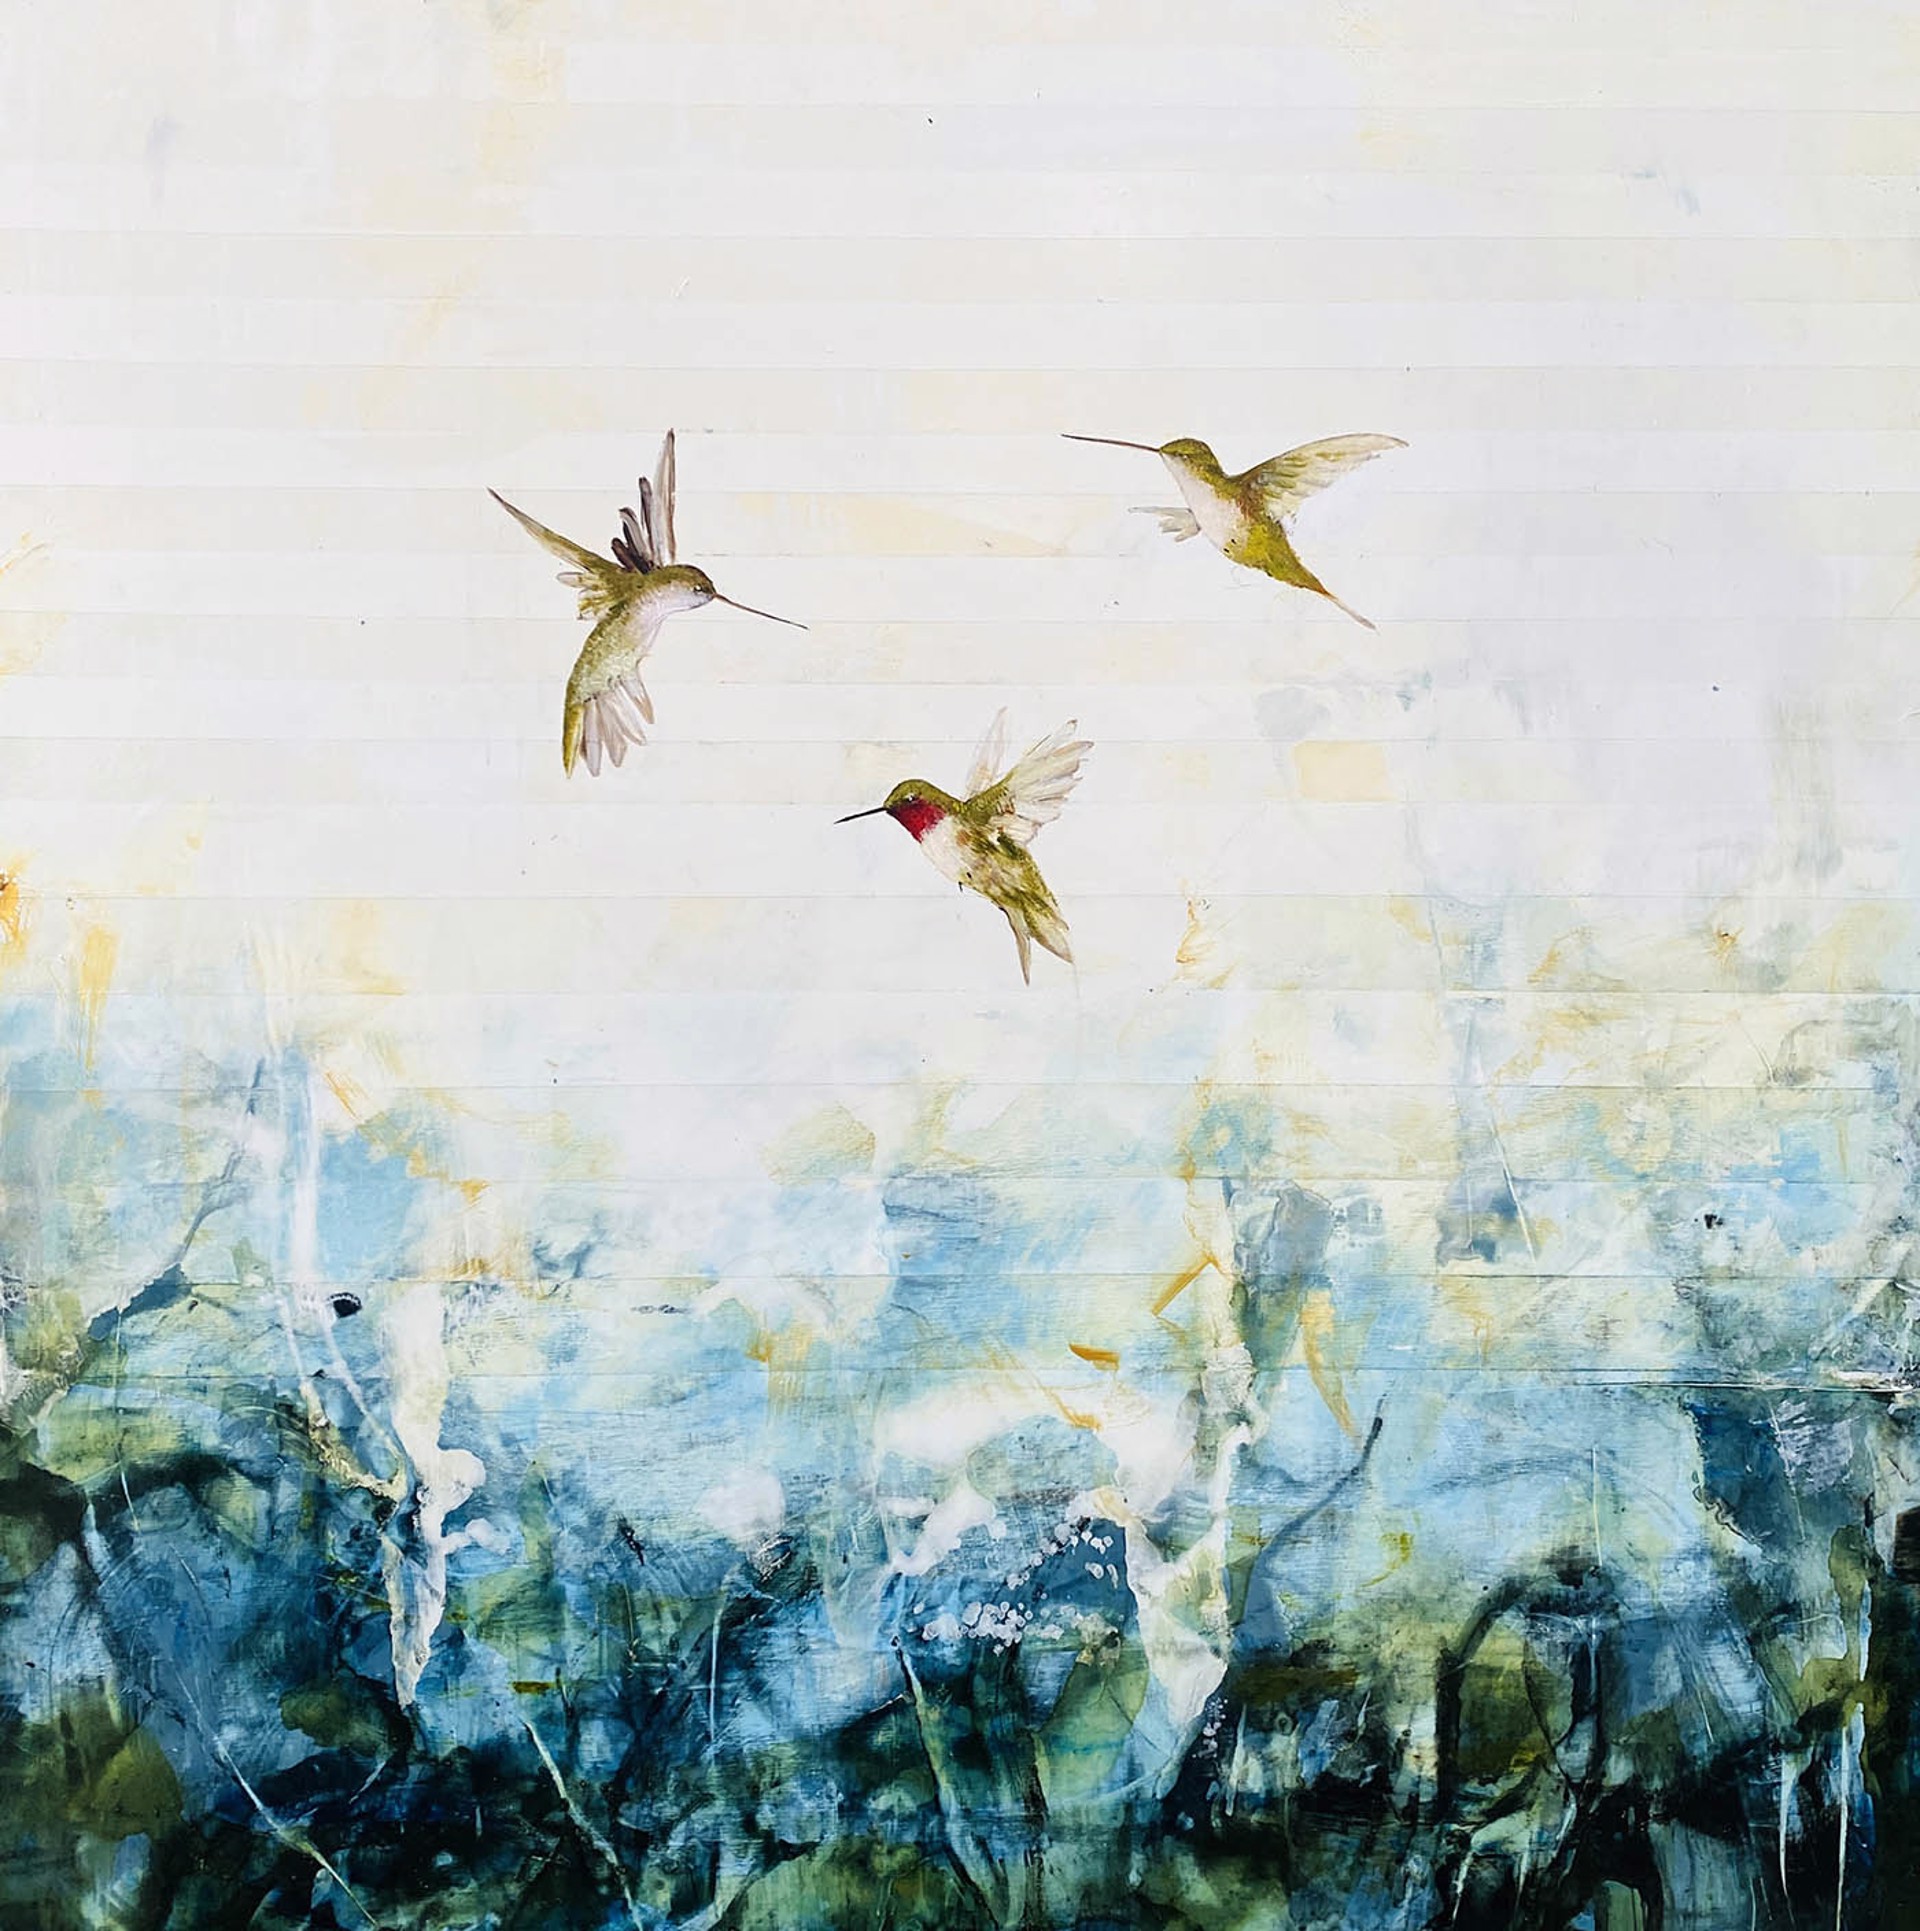 Original Oil Painting By Jenna Von Benedikt Featuring Three Flying Hummingbirds Over Abstracted Background In Turquoise Tones With Striping Details